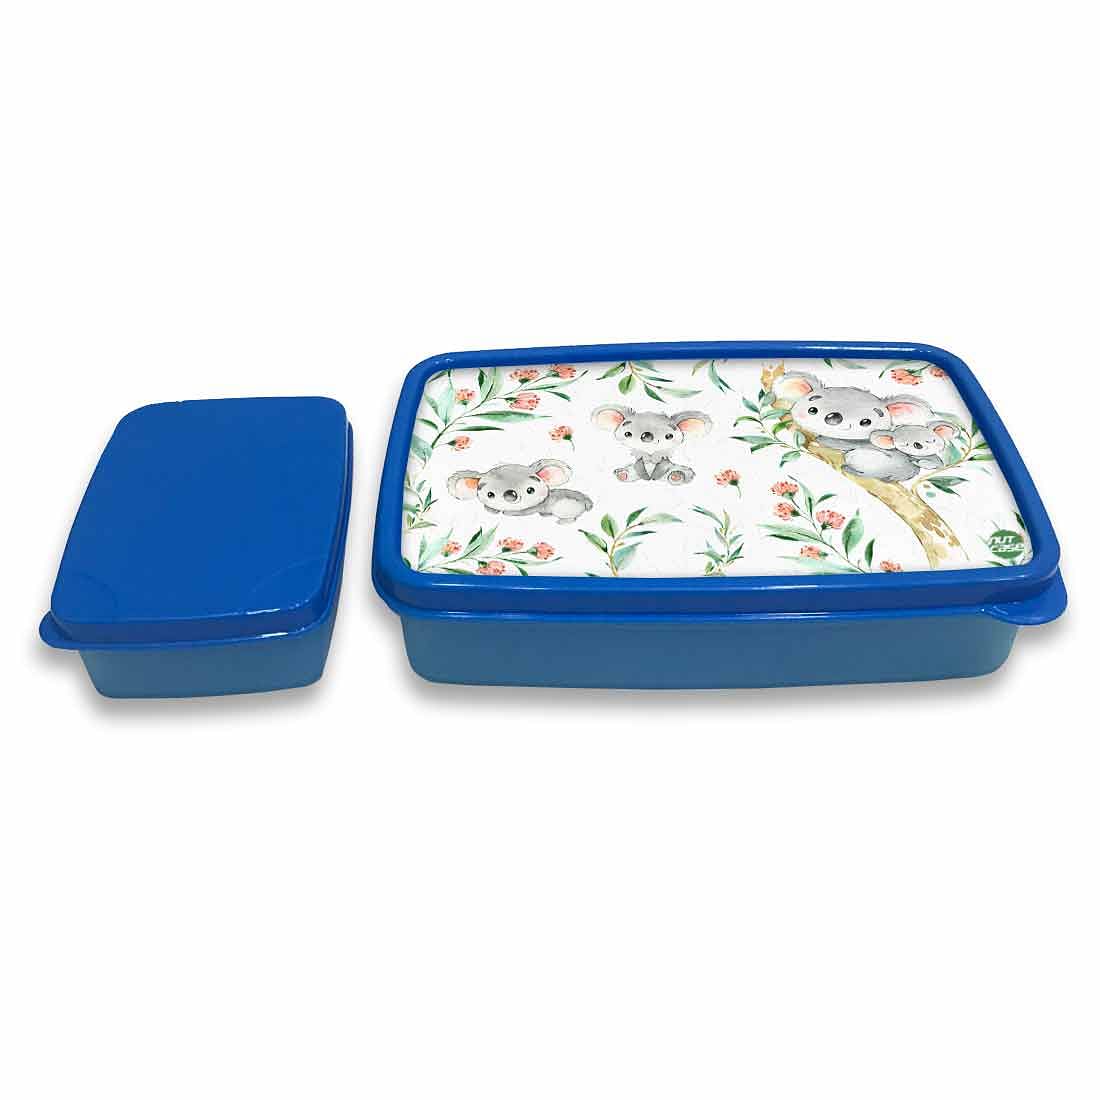 Flipkart.com | Kivya Birthday Return Gifts for Kids Party in Bulk  Multicolor 2 Compartment Lunch Boxes for Children - Pack of 12… 2 Containers  Lunch Box -